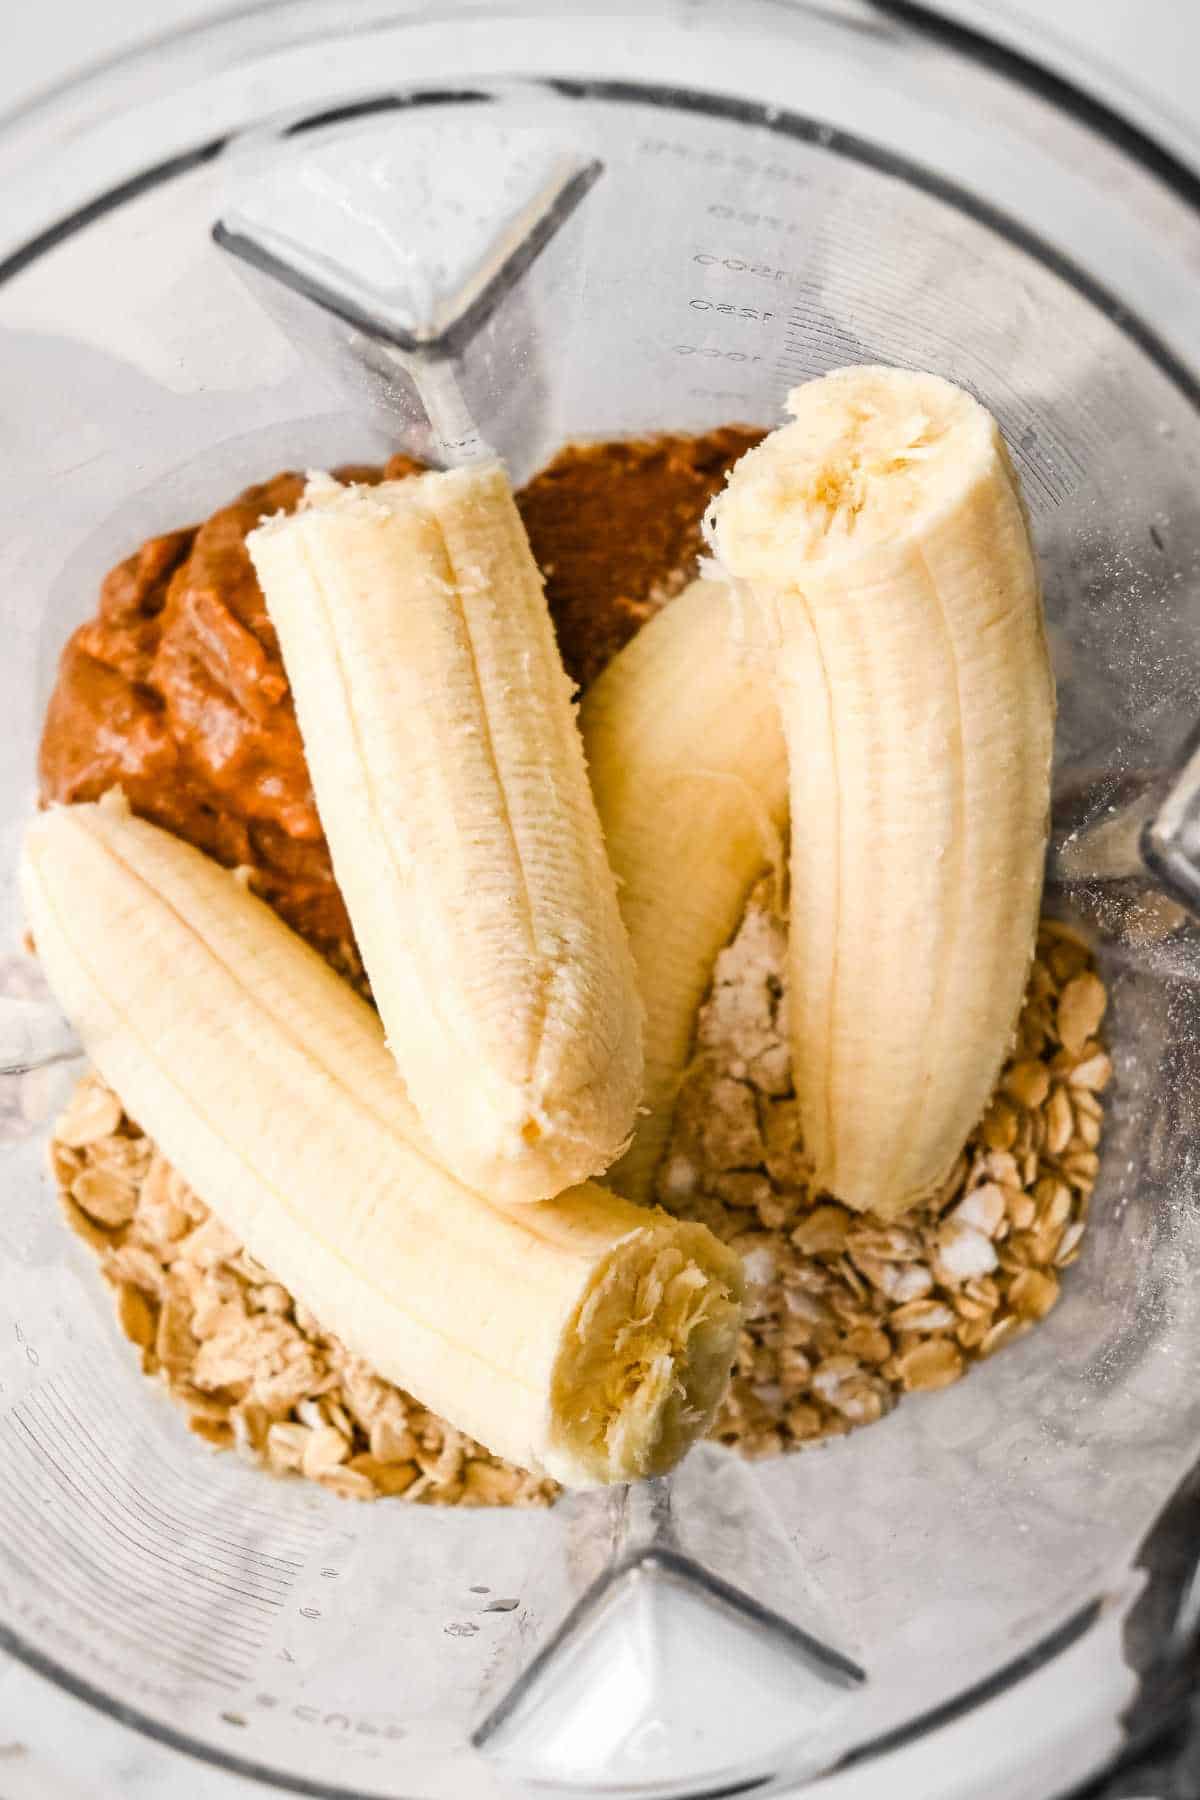 bananas, oatmeal, peanut butter, and other recipe ingredients in a blender.